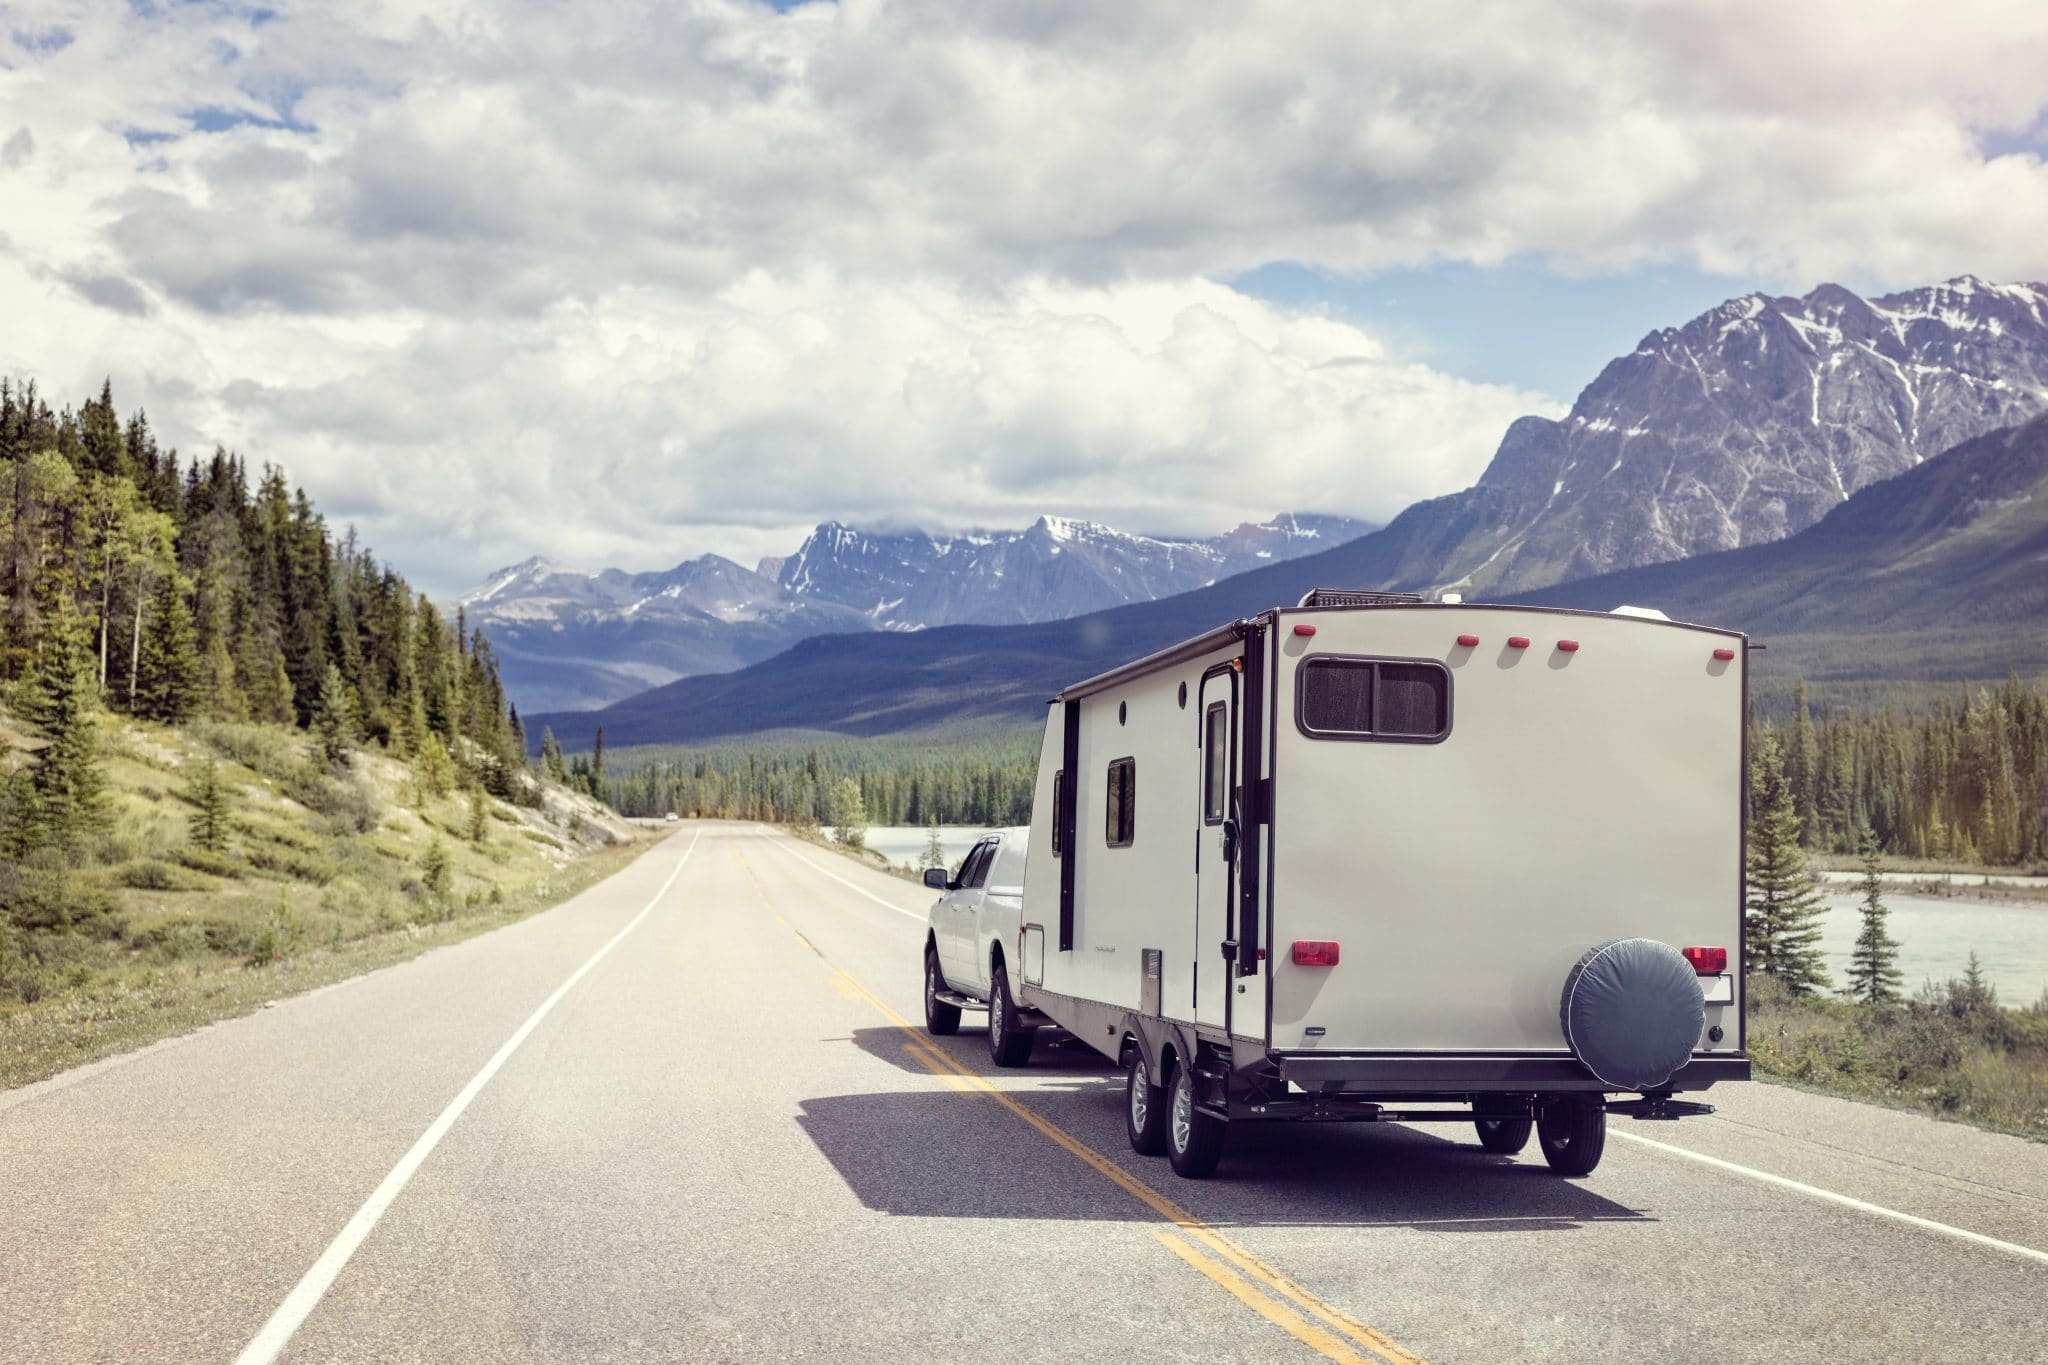 How To Plan The Perfect Road Trip In Your New Camper Van?